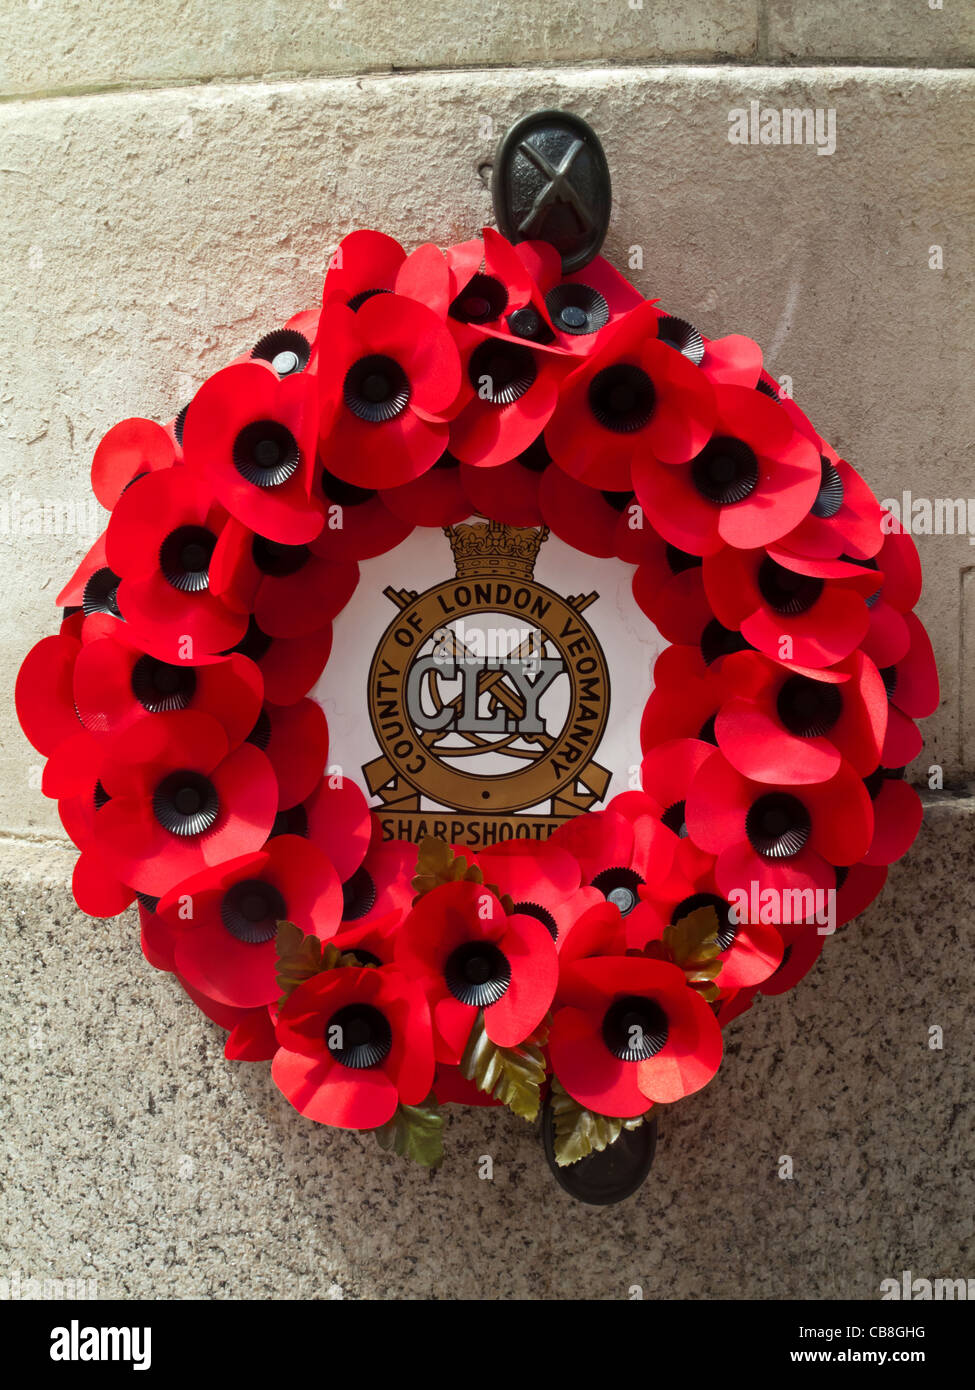 Poppy wreath commemorating the County of London Yeomanry displayed in the City of London England UK Stock Photo